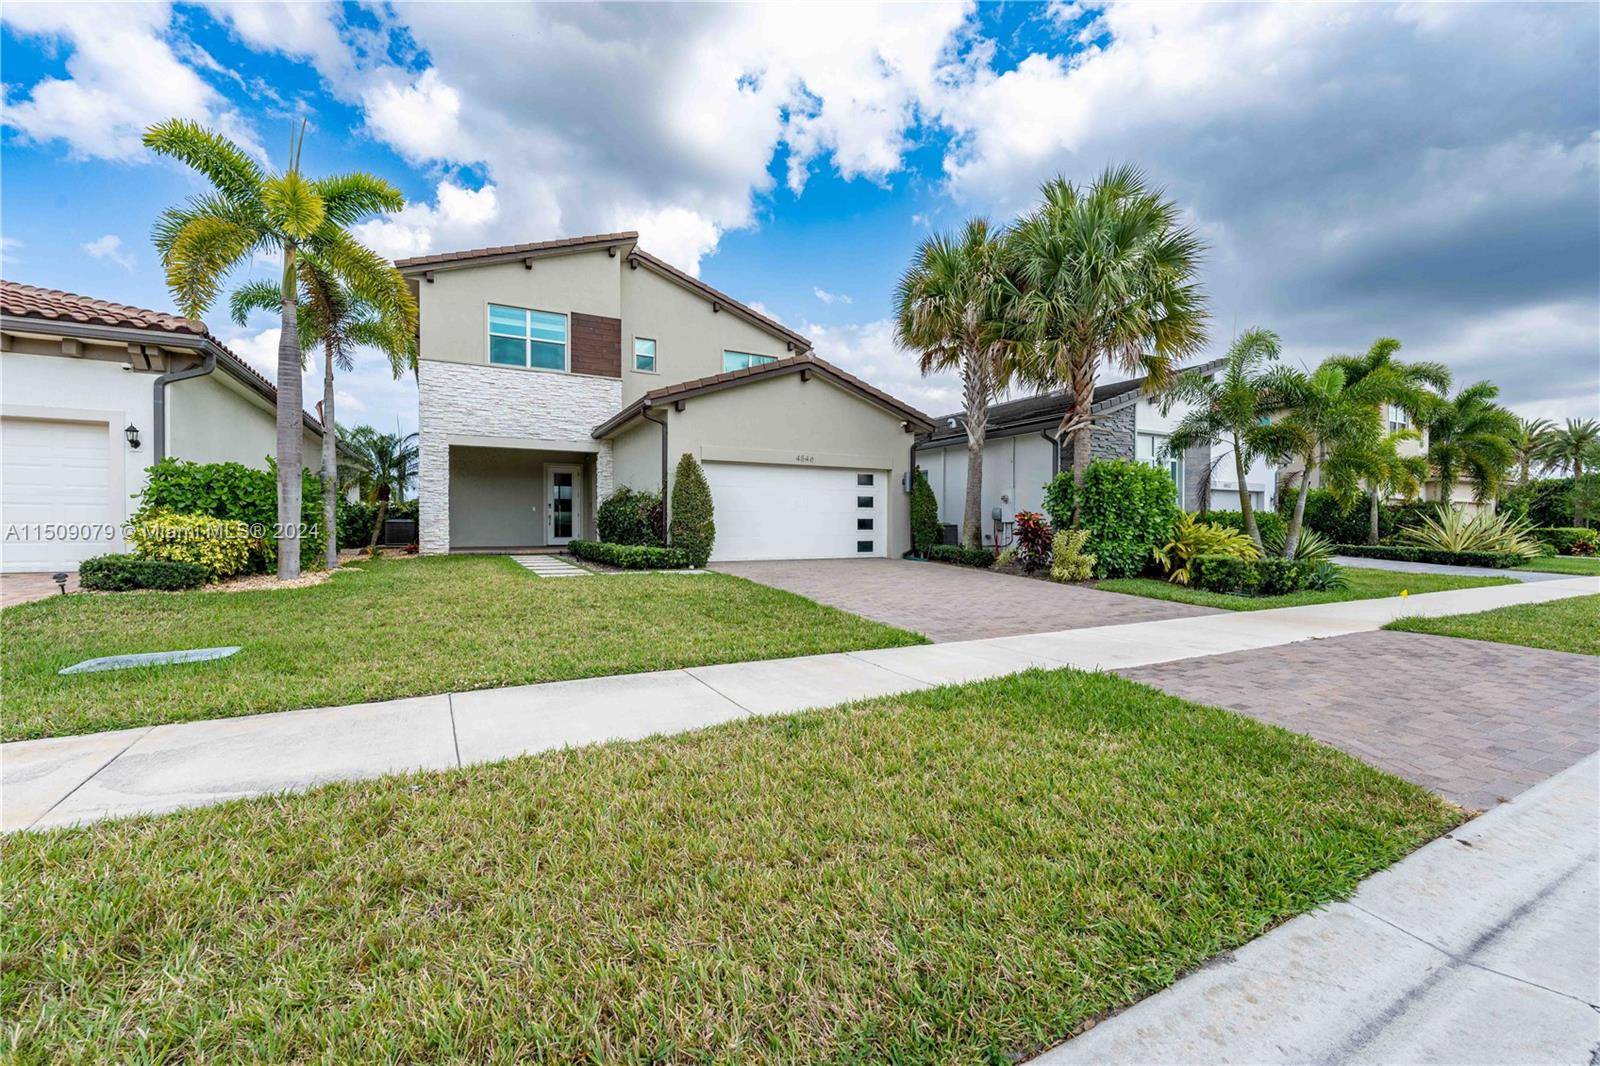 This luxurious waterfront two story heated pool with spa home is fully upgraded, boasting fully impact windows throughout.